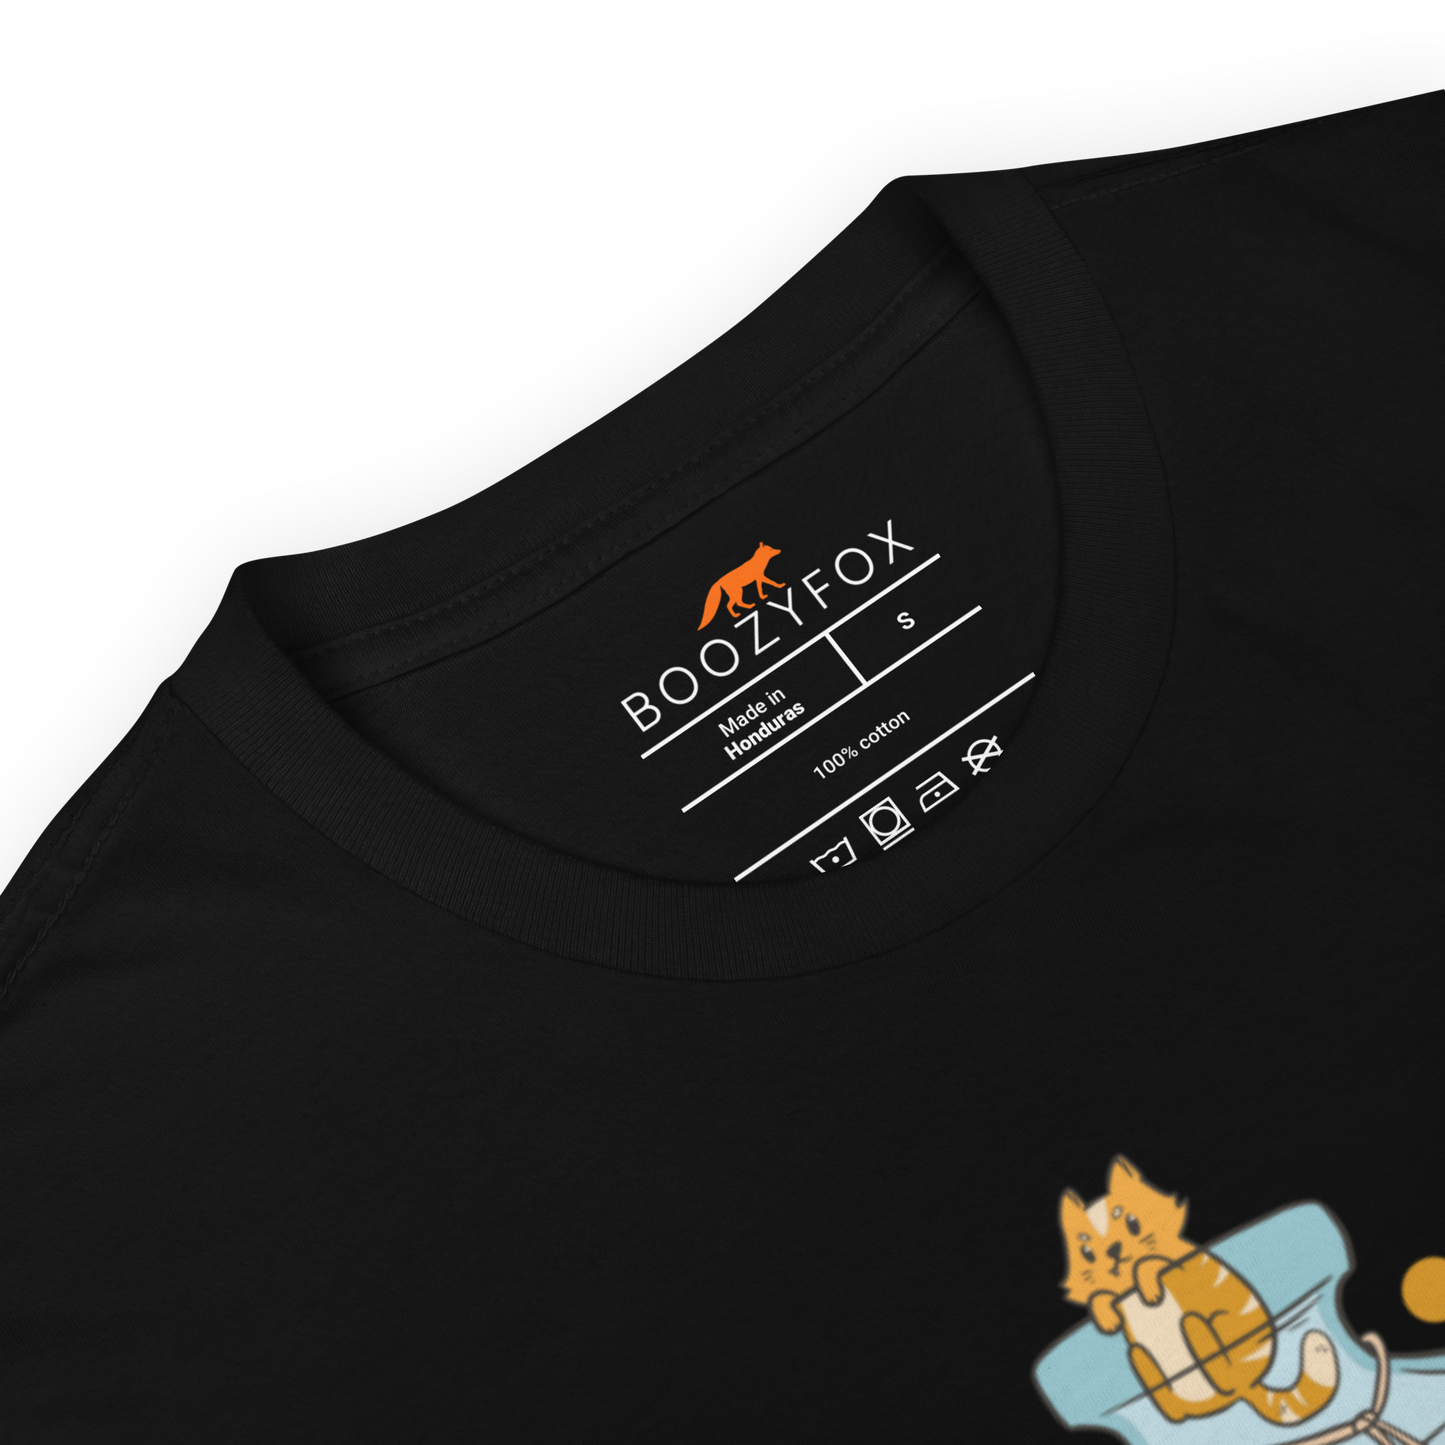 Product Details of a Black Cat T-Shirt featuring a funny Anti-Depressants graphic on the chest - Cute Graphic Cat T-Shirts - Boozy Fox